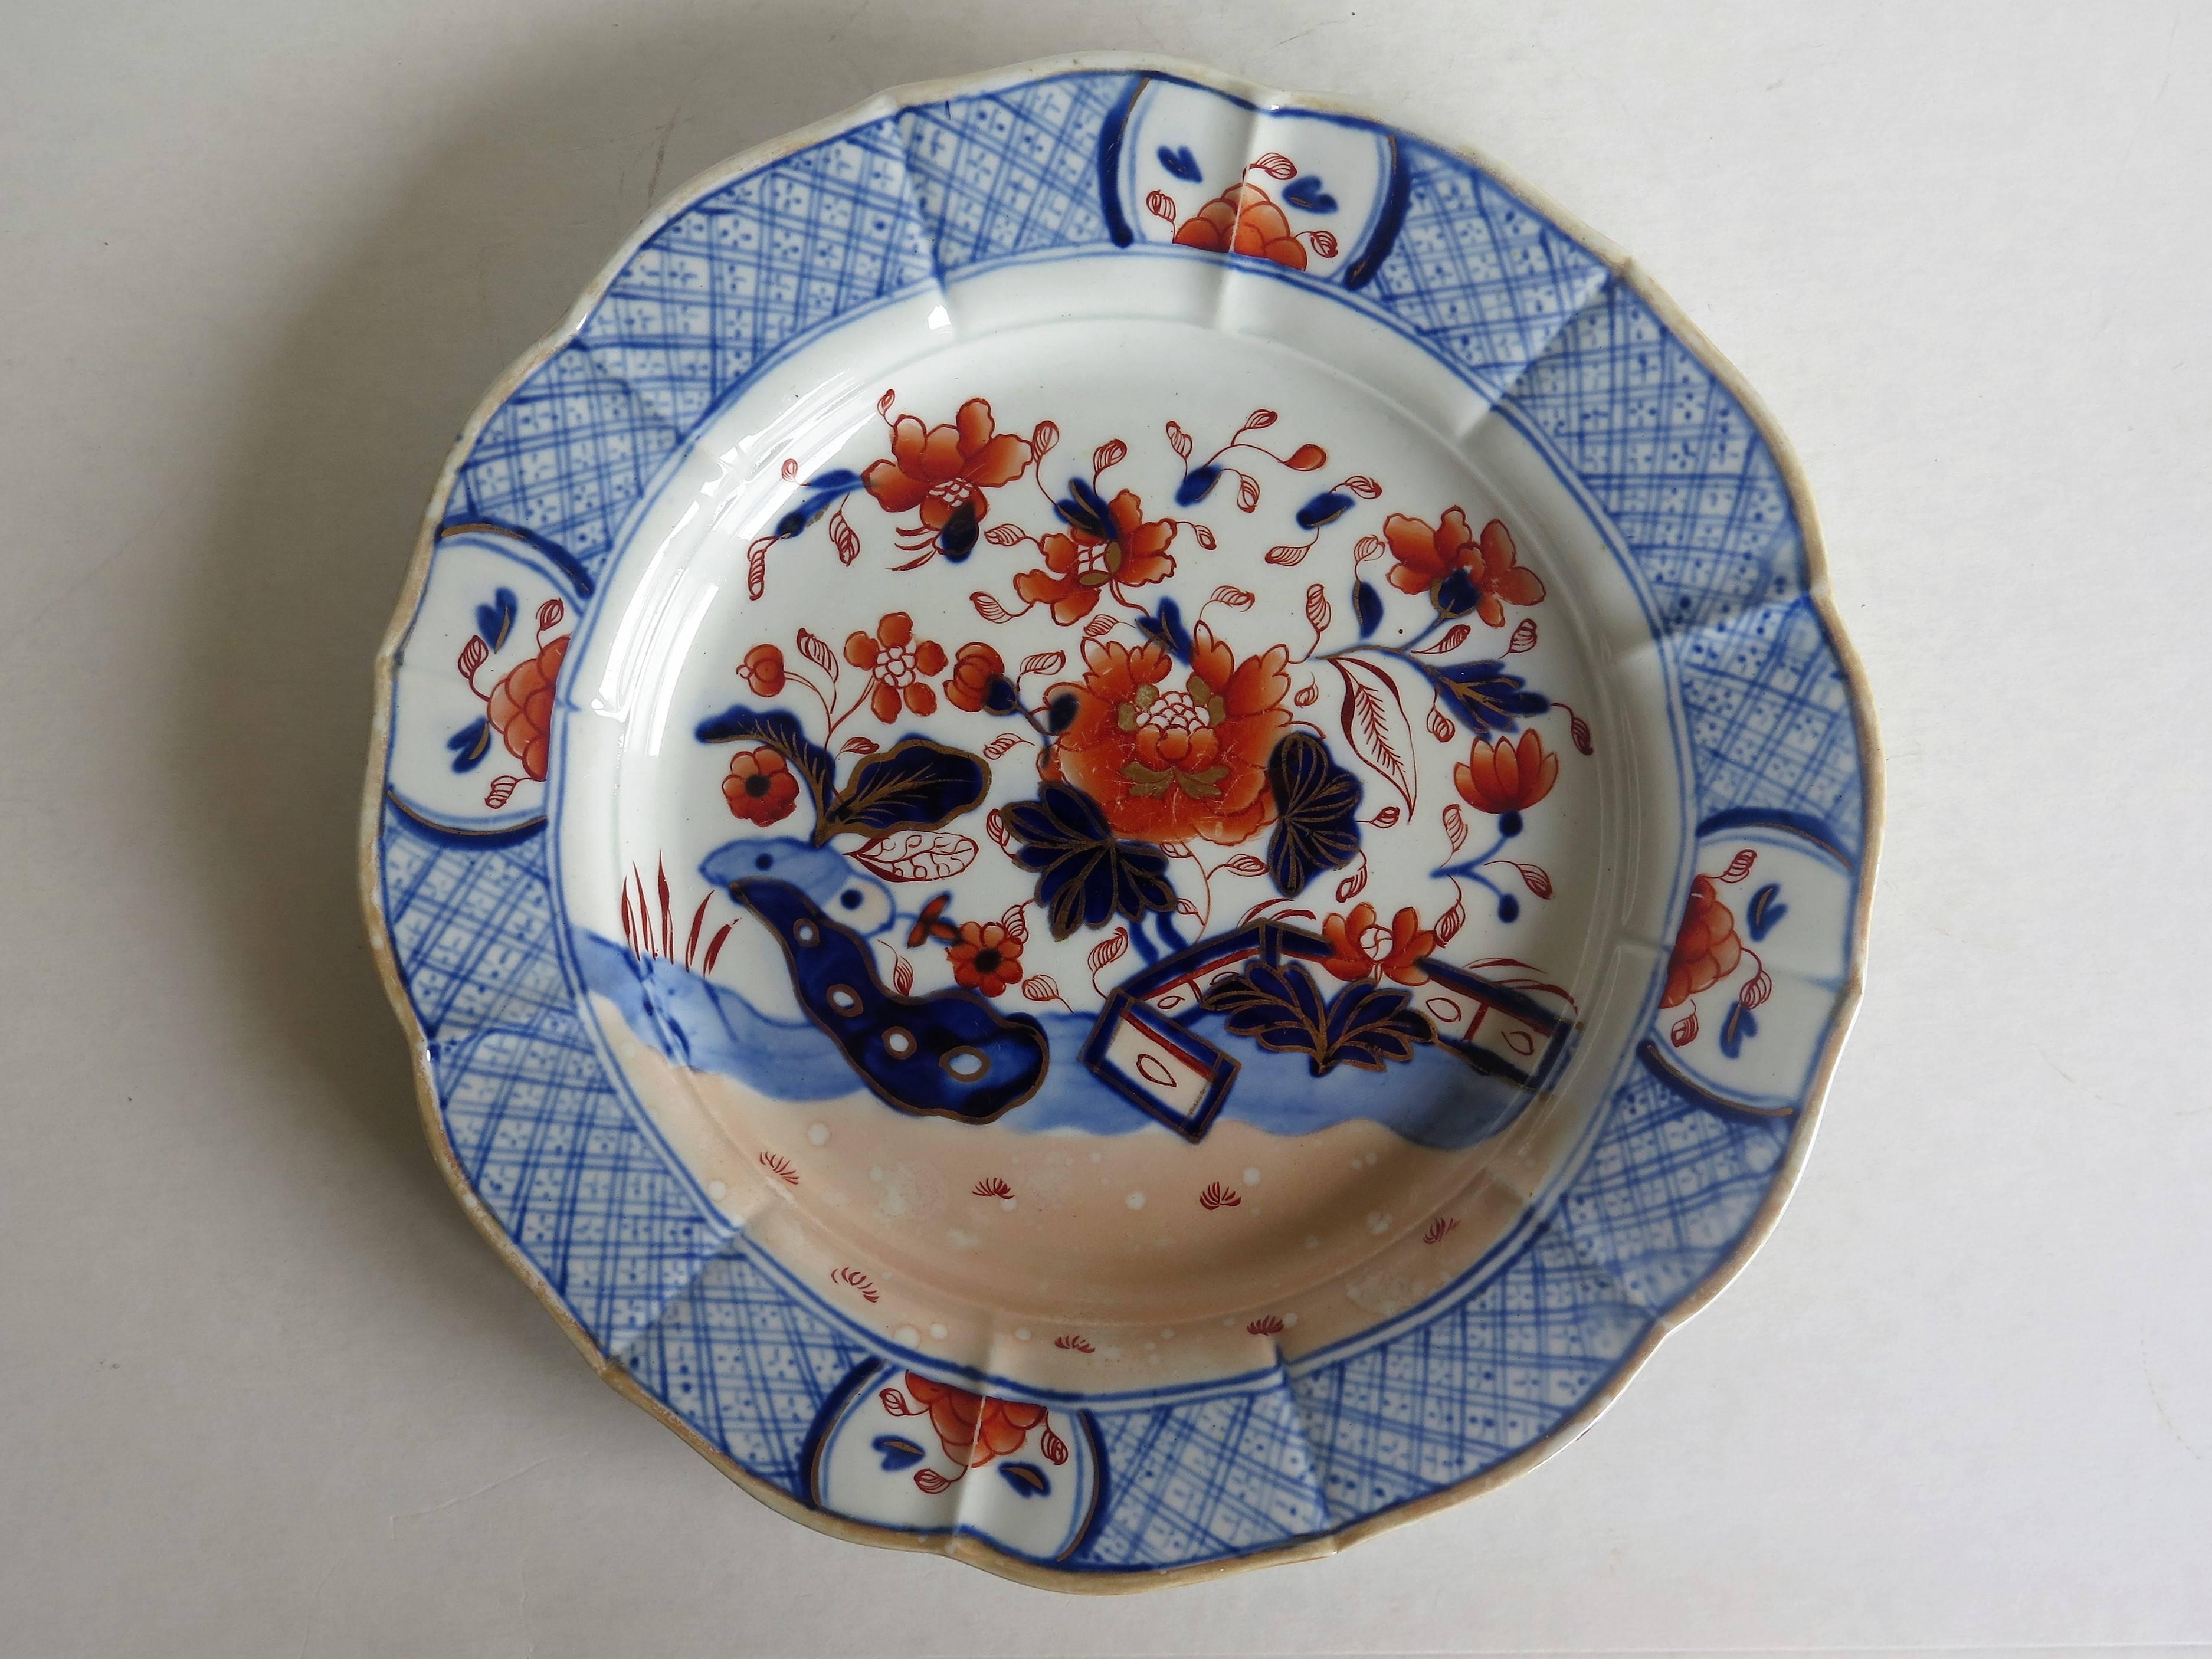 Chinoiserie Early Mason's Ironstone Desert Plate or Dish in Fence Japan Pattern, circa 1815